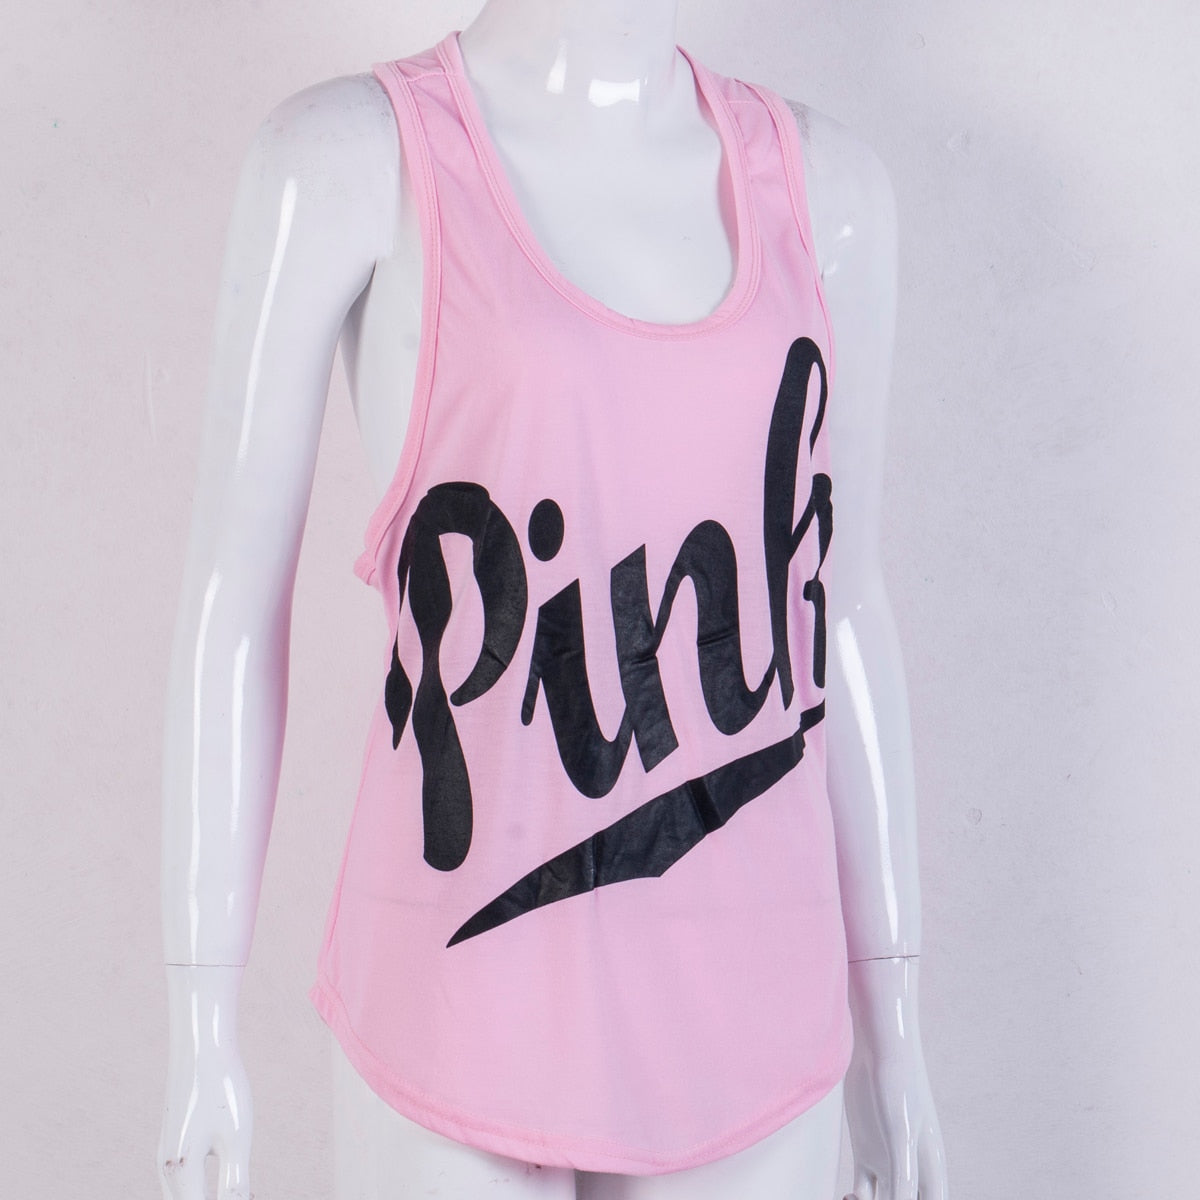 Ladies Casual Sleeveless Tops in Pink Letter with black graphics - 0